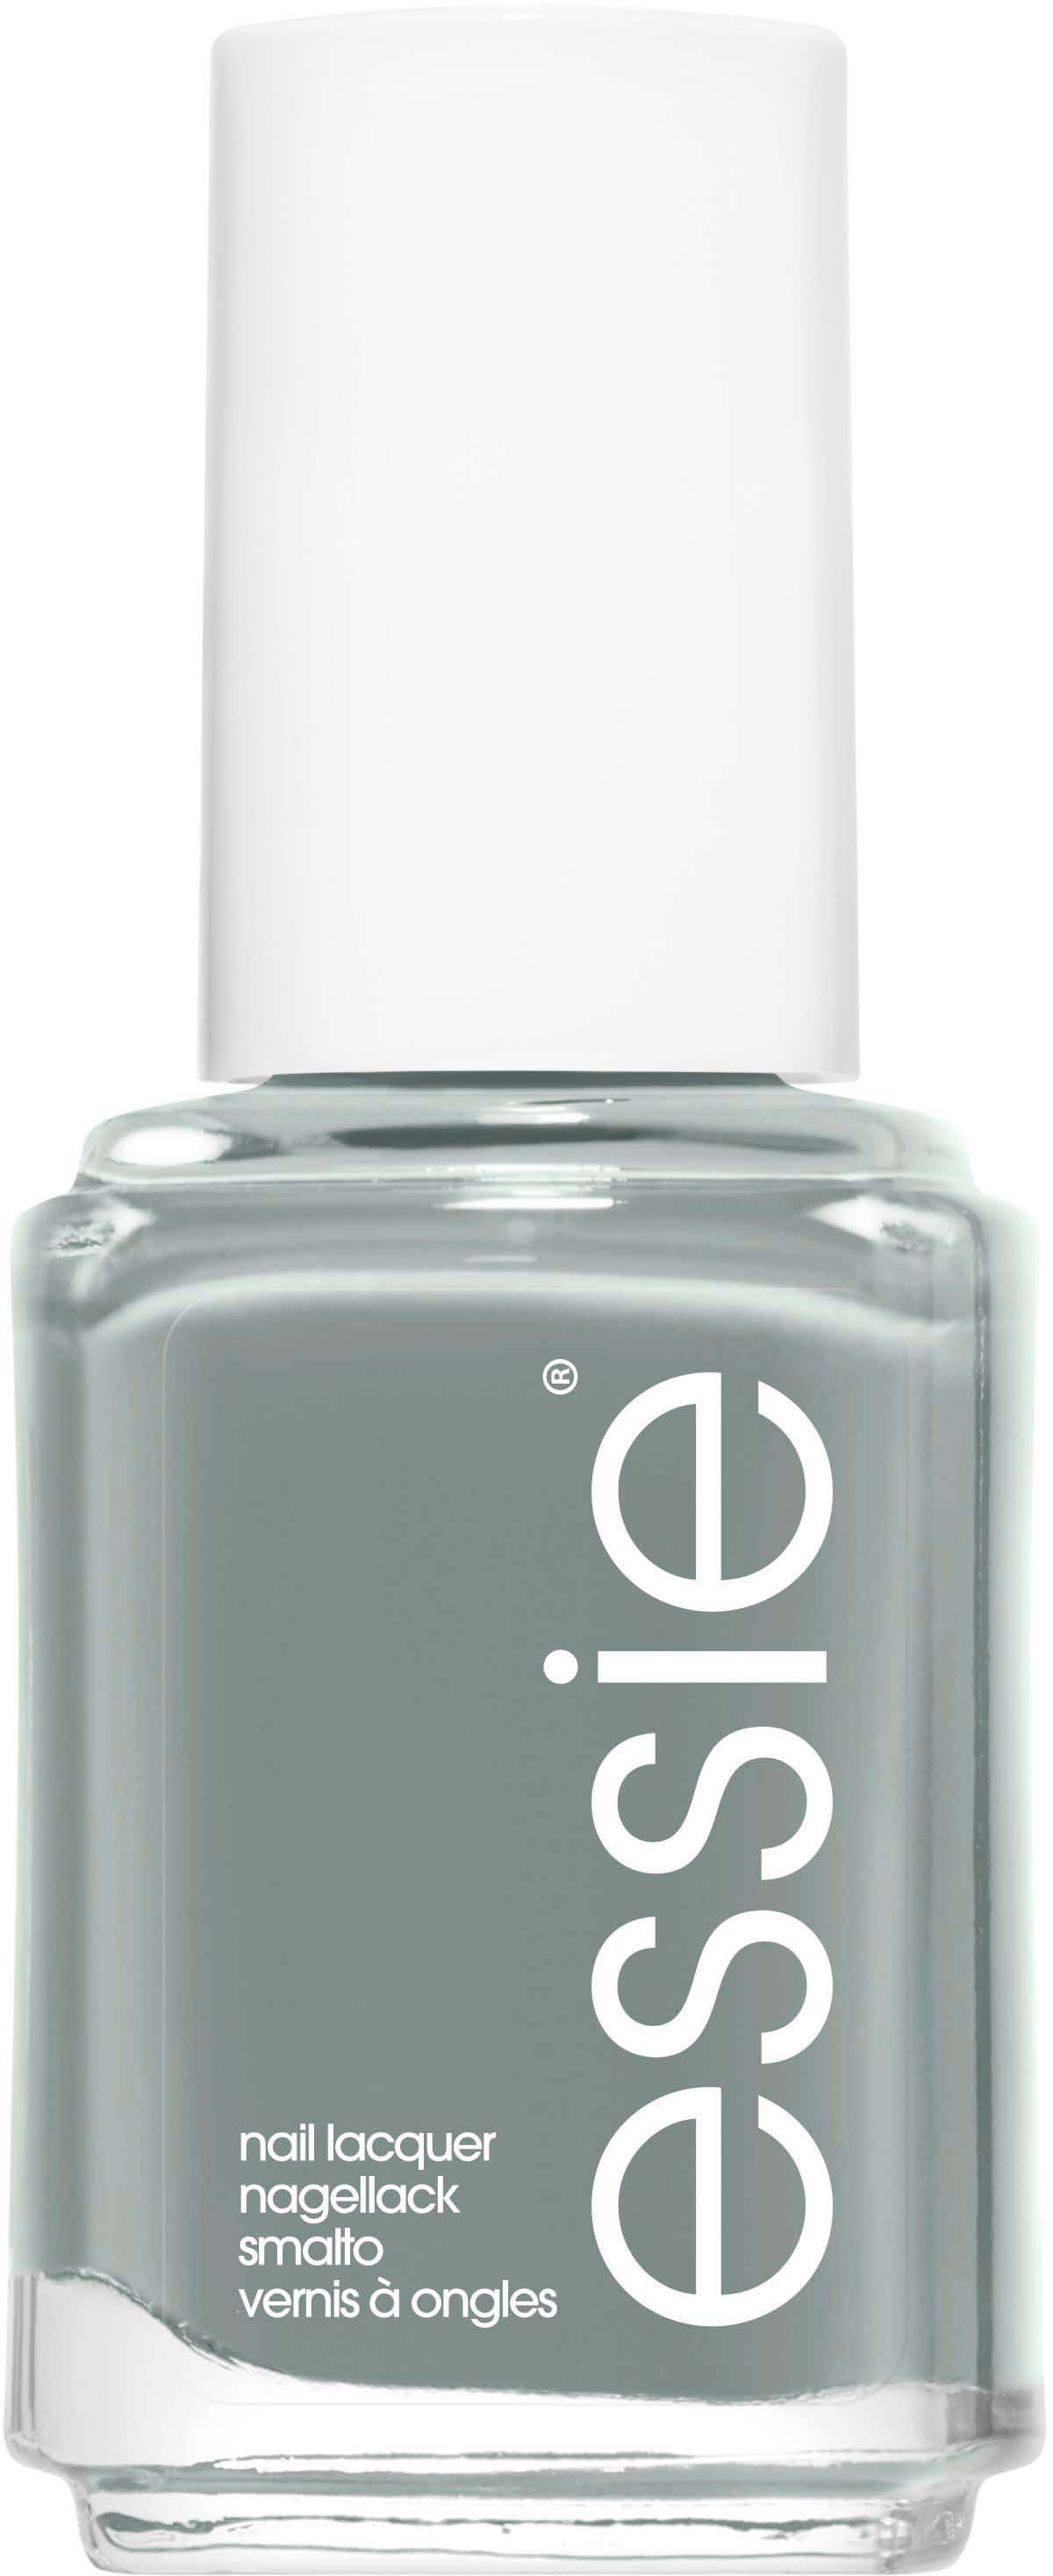 Essie Nail Lacquer 252 Maximillian Strasse Her